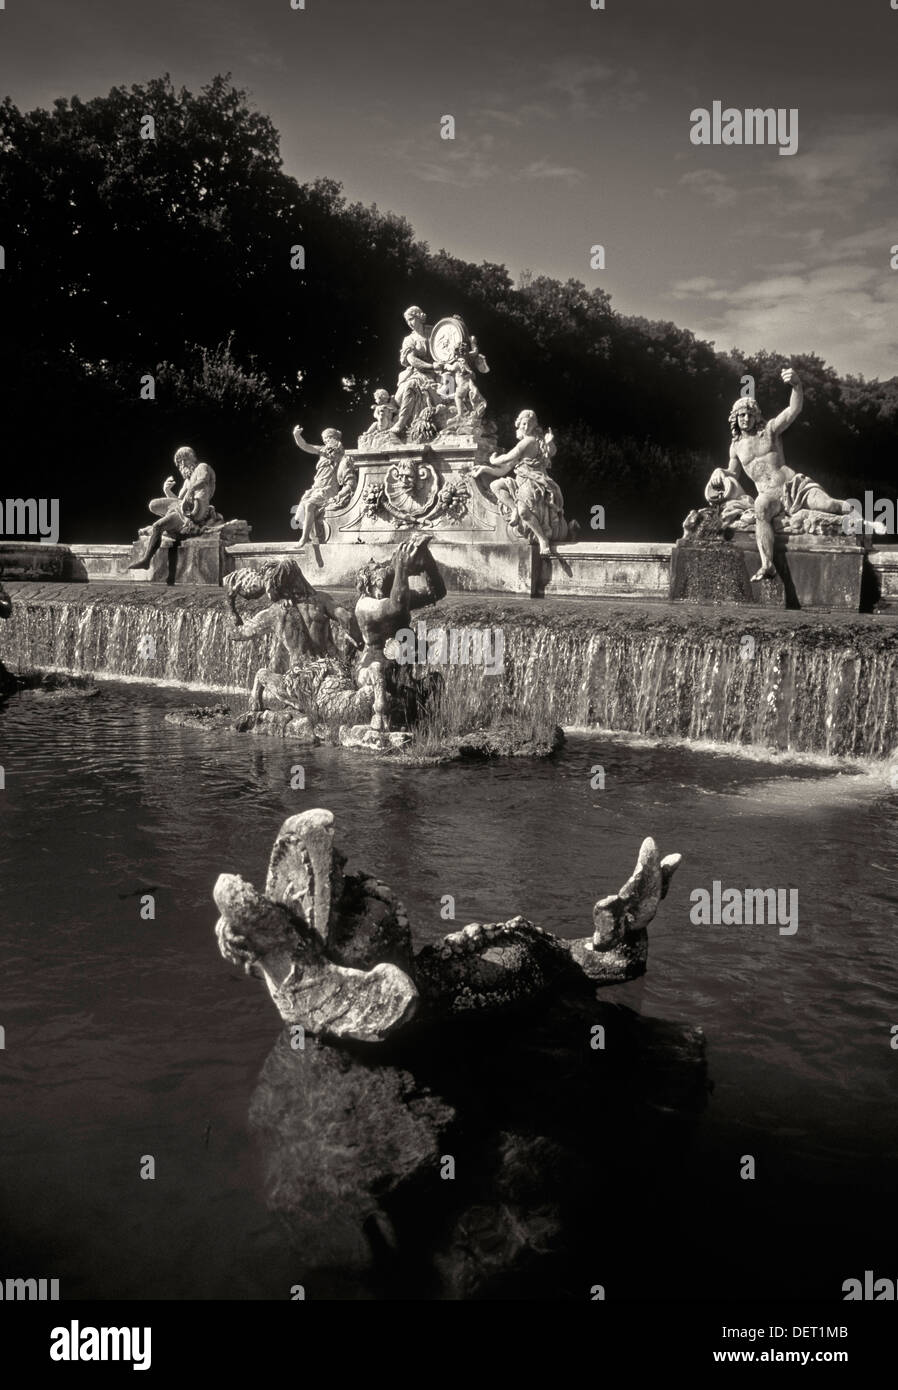 Fountain of Ceres, or Cerere, goddess of agriculture and fertility, in the park of the Royal Palace at Caserta, Campania, Italy Stock Photo